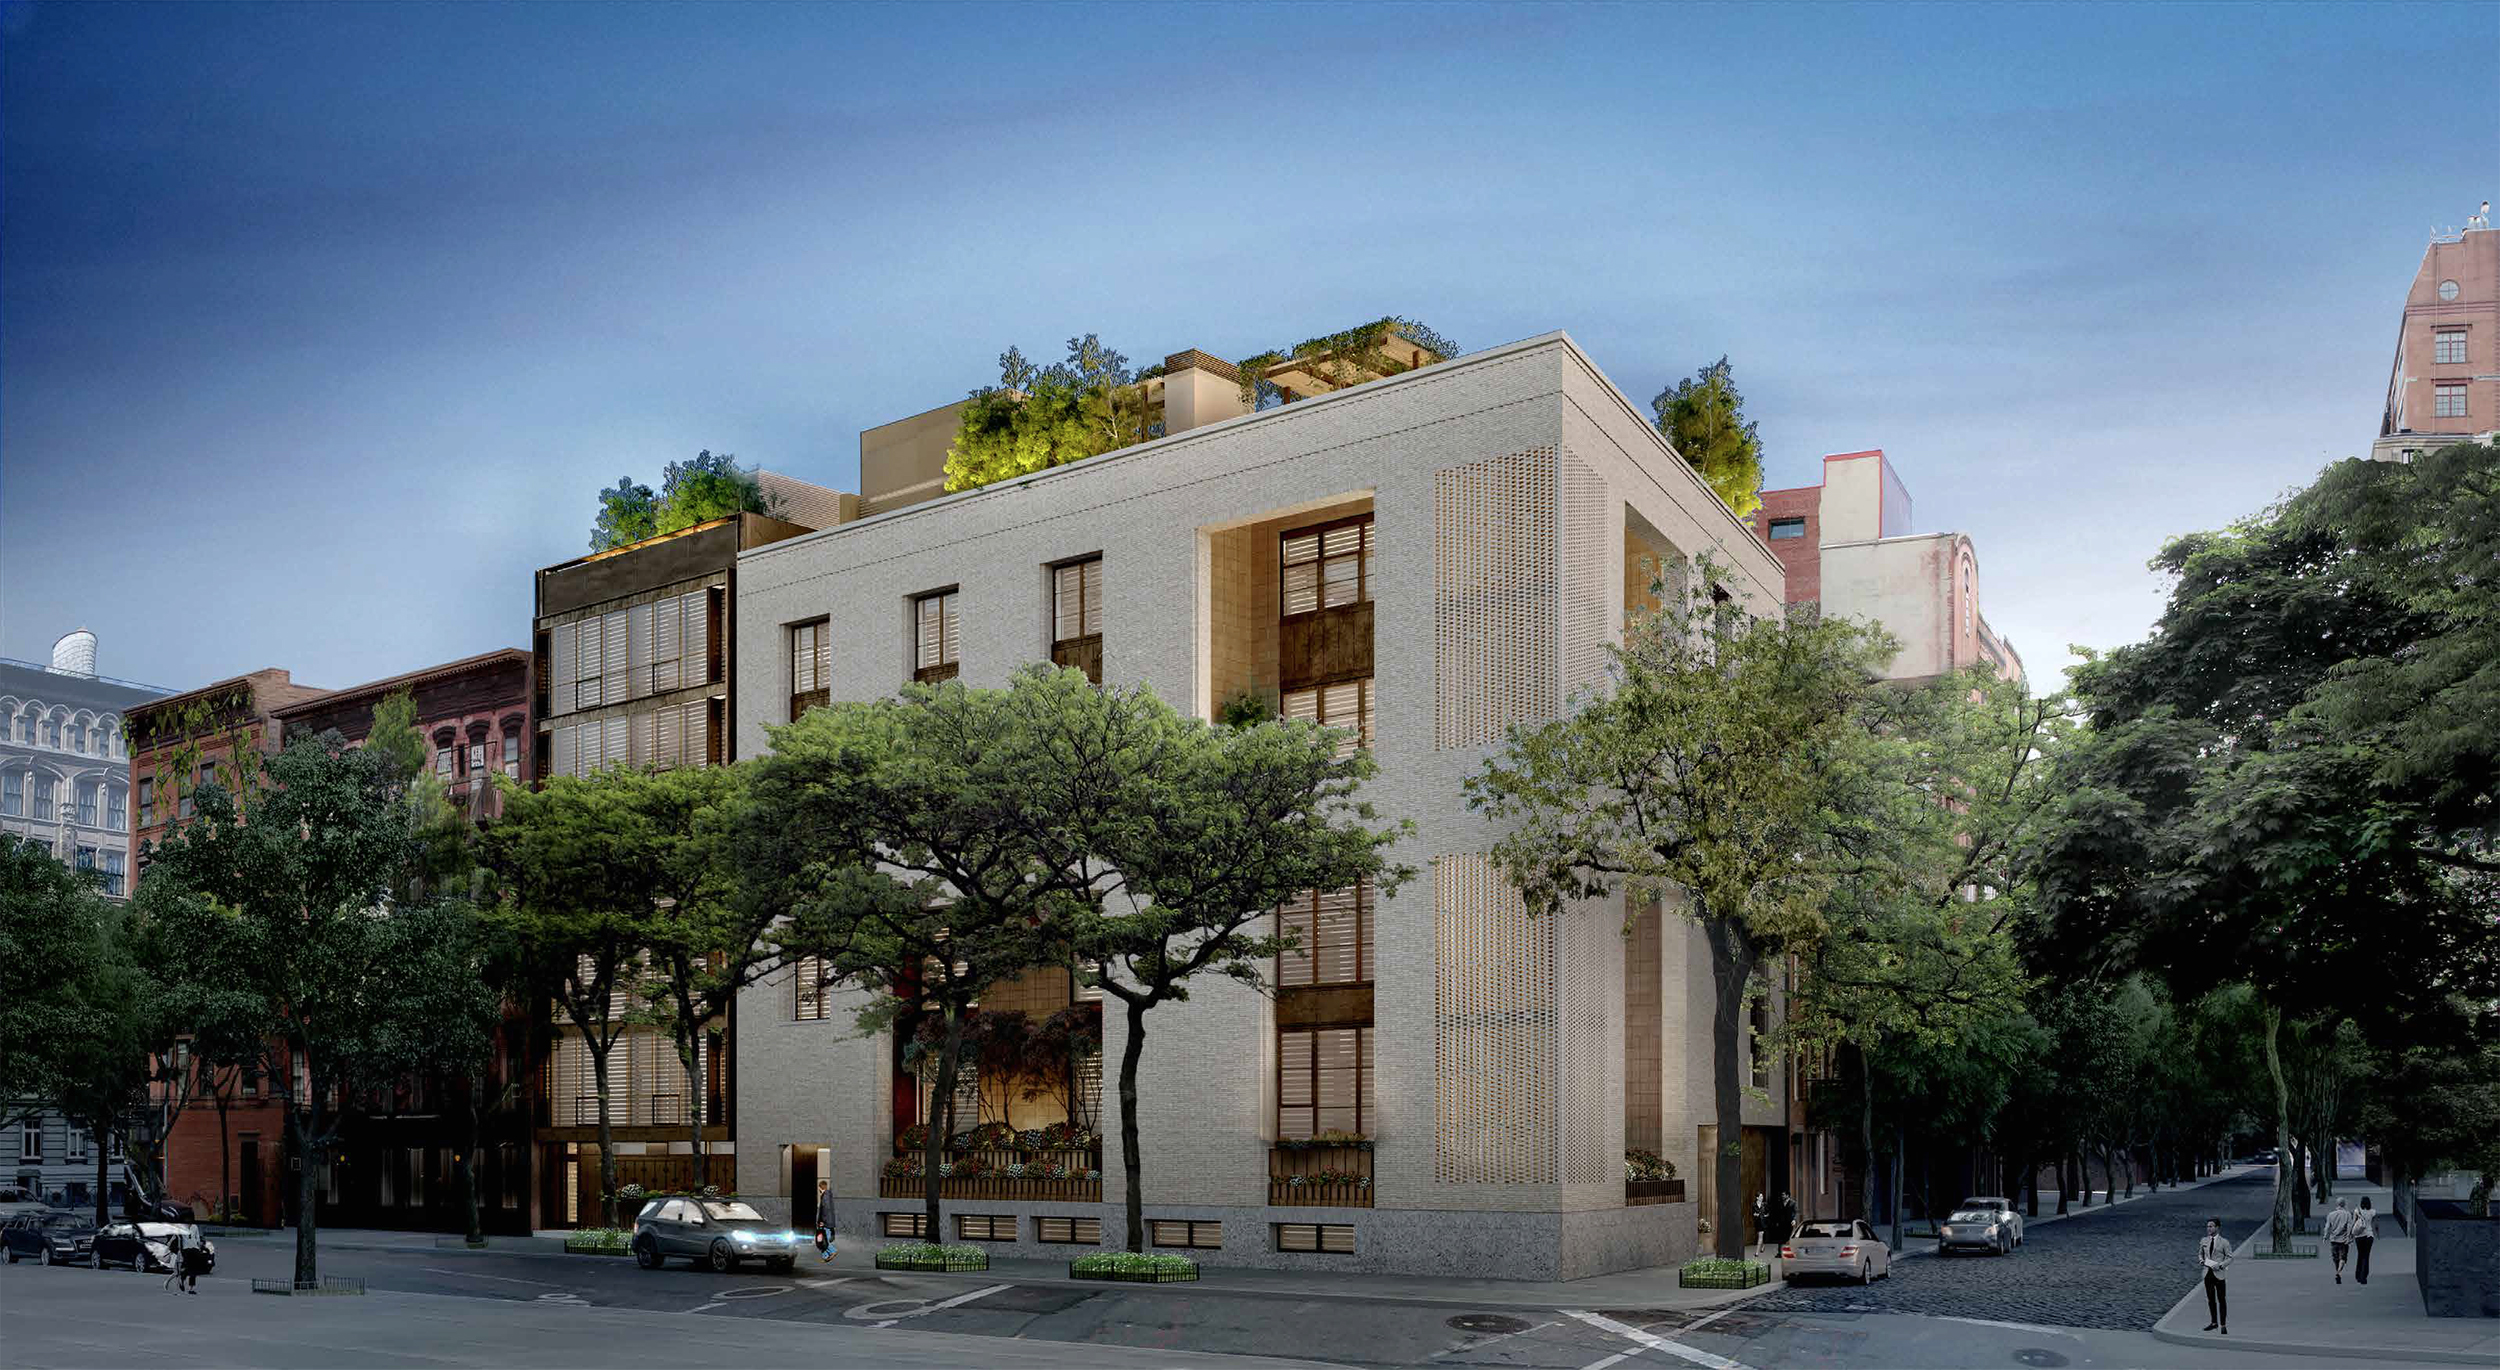 Proposal for 145 Perry Street, a.k.a. 703-711 Washington Street. The apartment building is to the left and the mega-mansion is to the right.